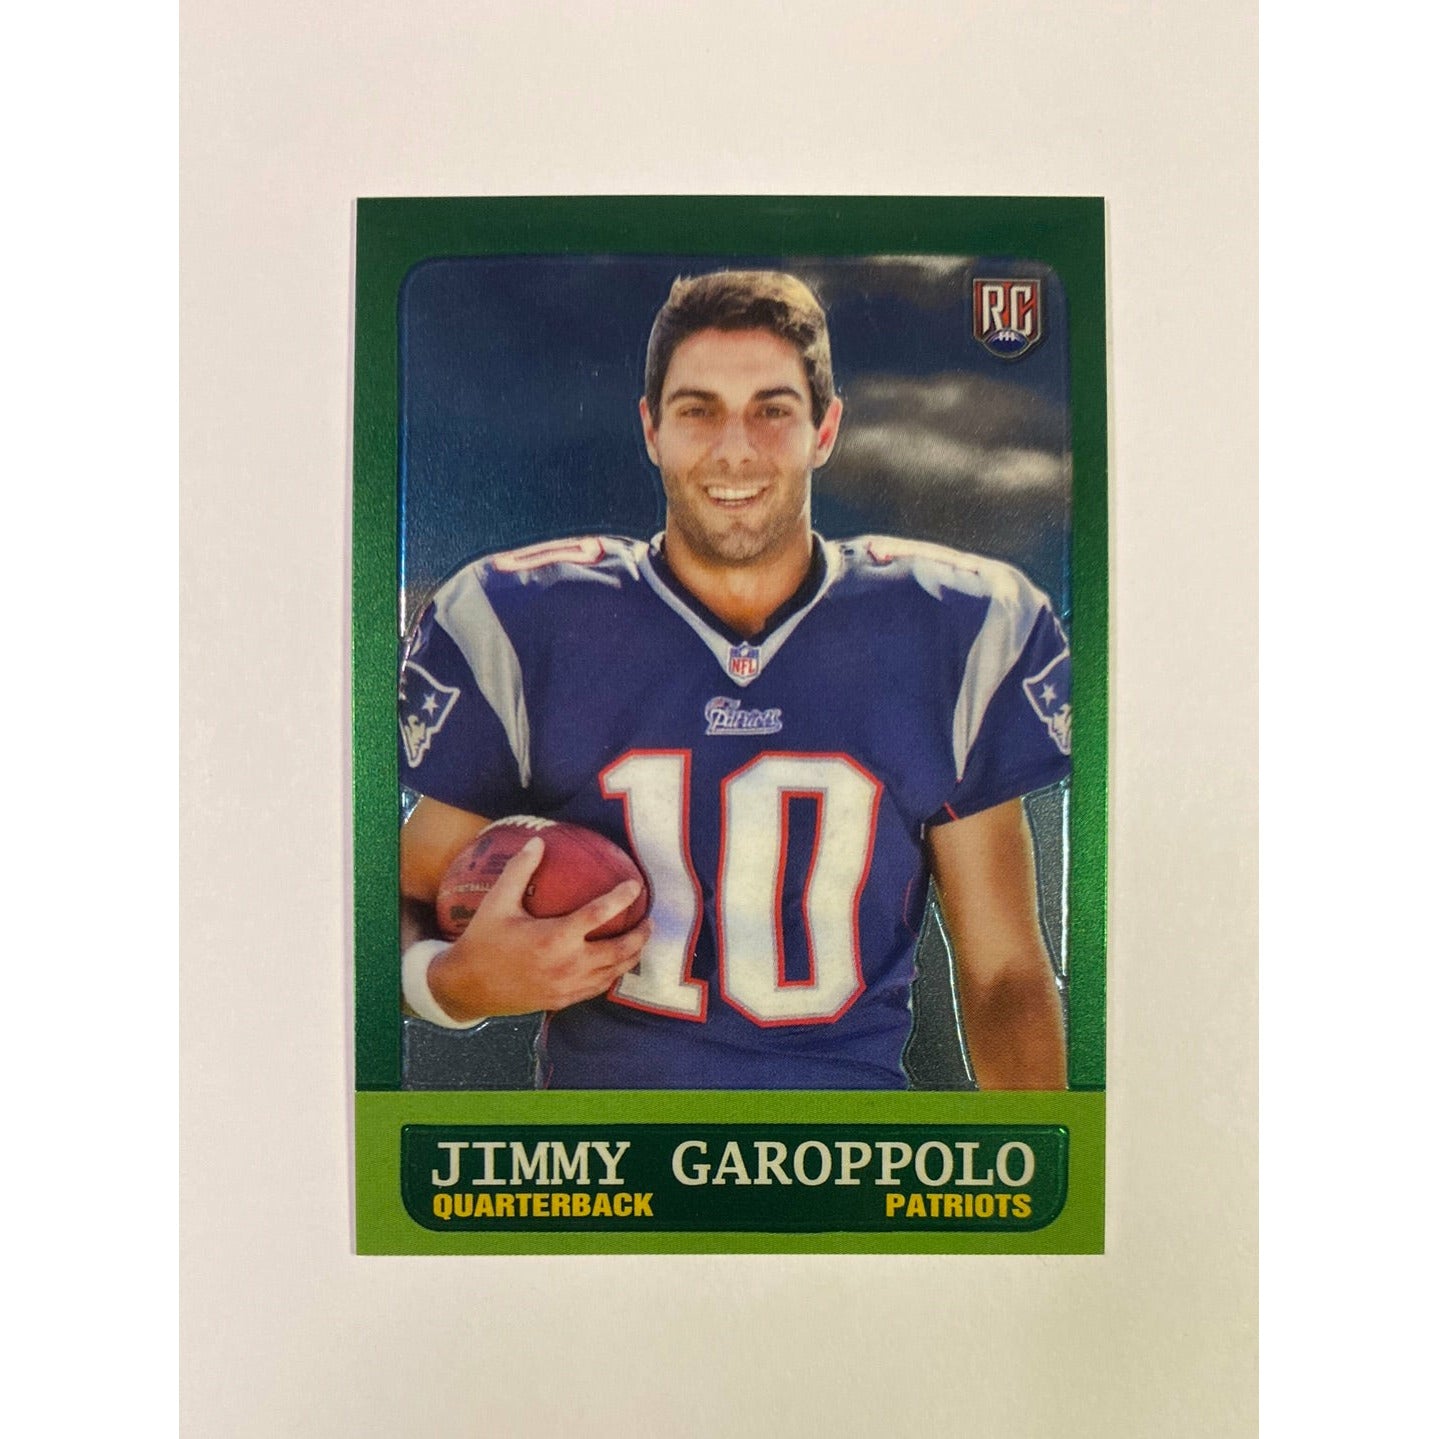  2014 Topps Chrome Mini Jimmy Garoppolo RC  Local Legends Cards & Collectibles